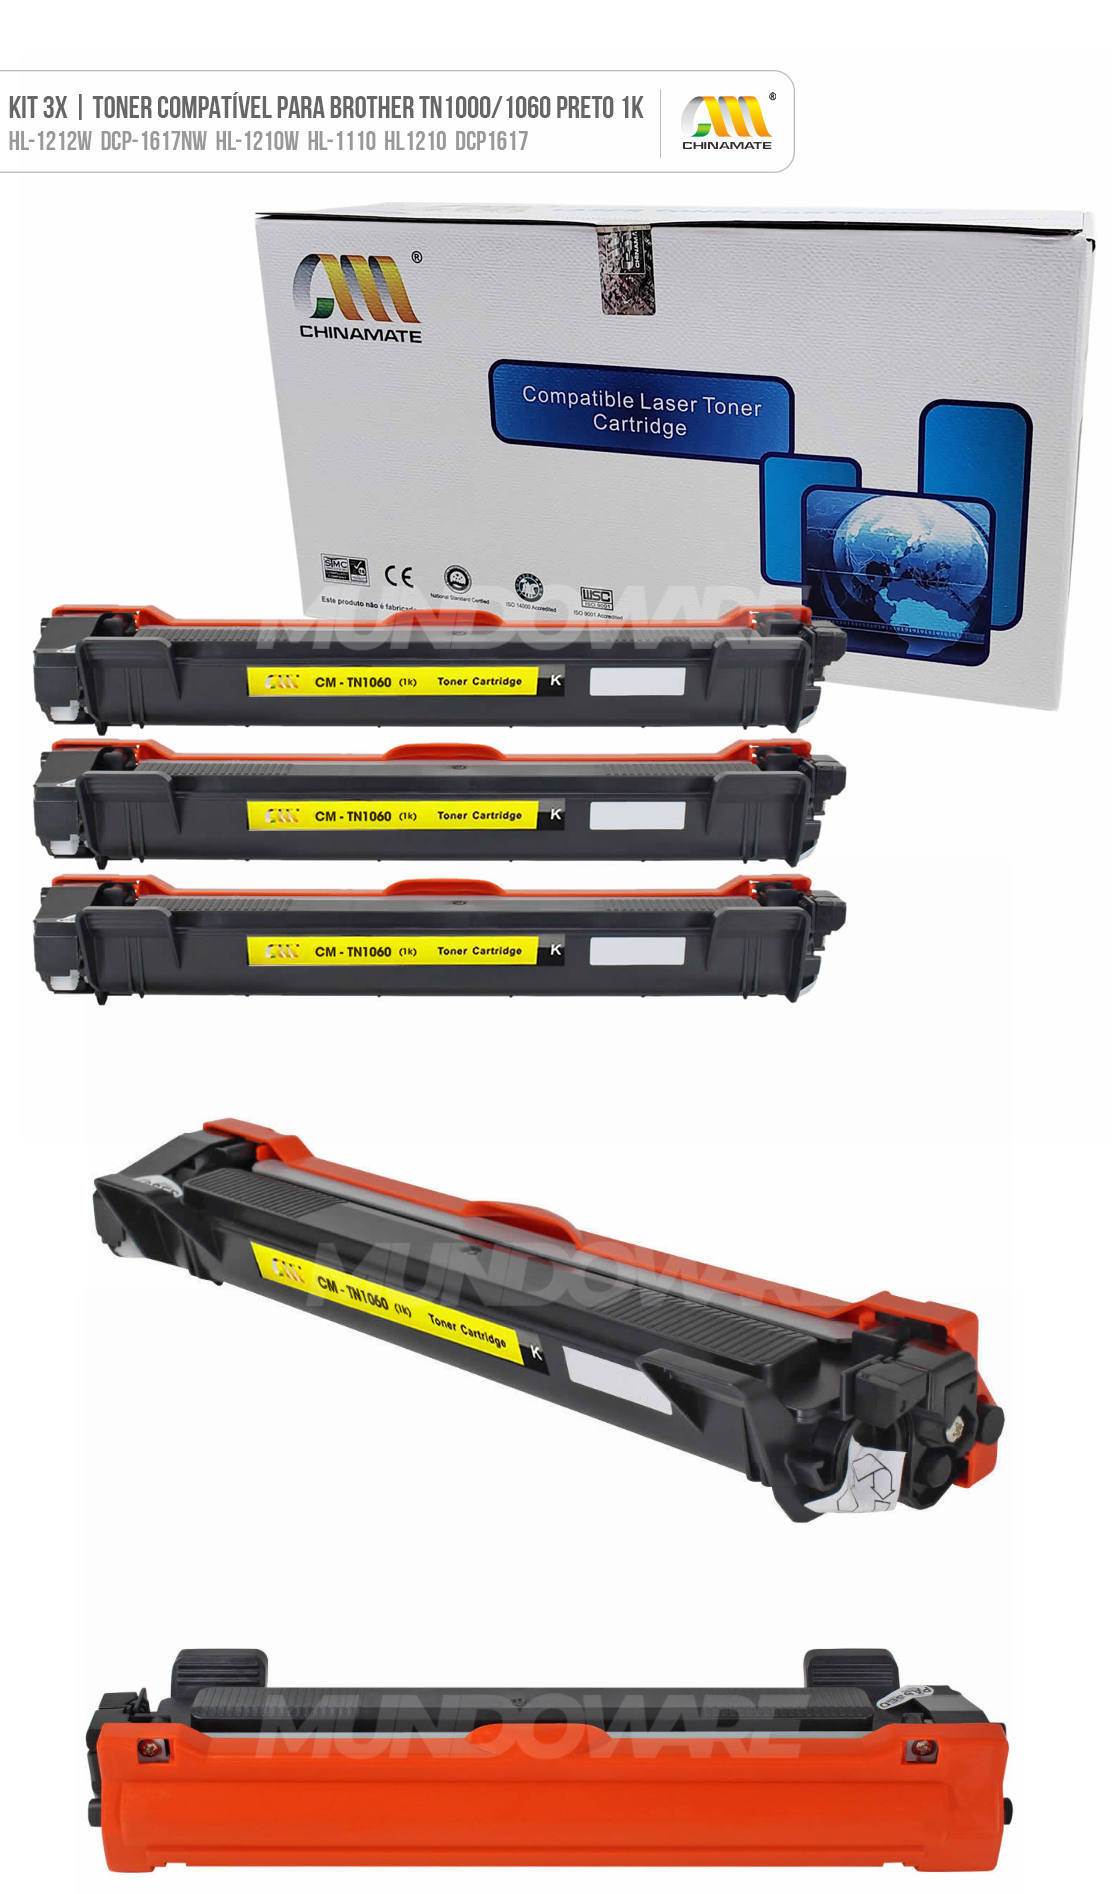 Kit 3x Toner Compatvel para Brother TN1060 Chinamate para HL-1110 HL-1112 DCP-1510 DCP-1612w HL-1212w DCP-1617nw Preto 1.000